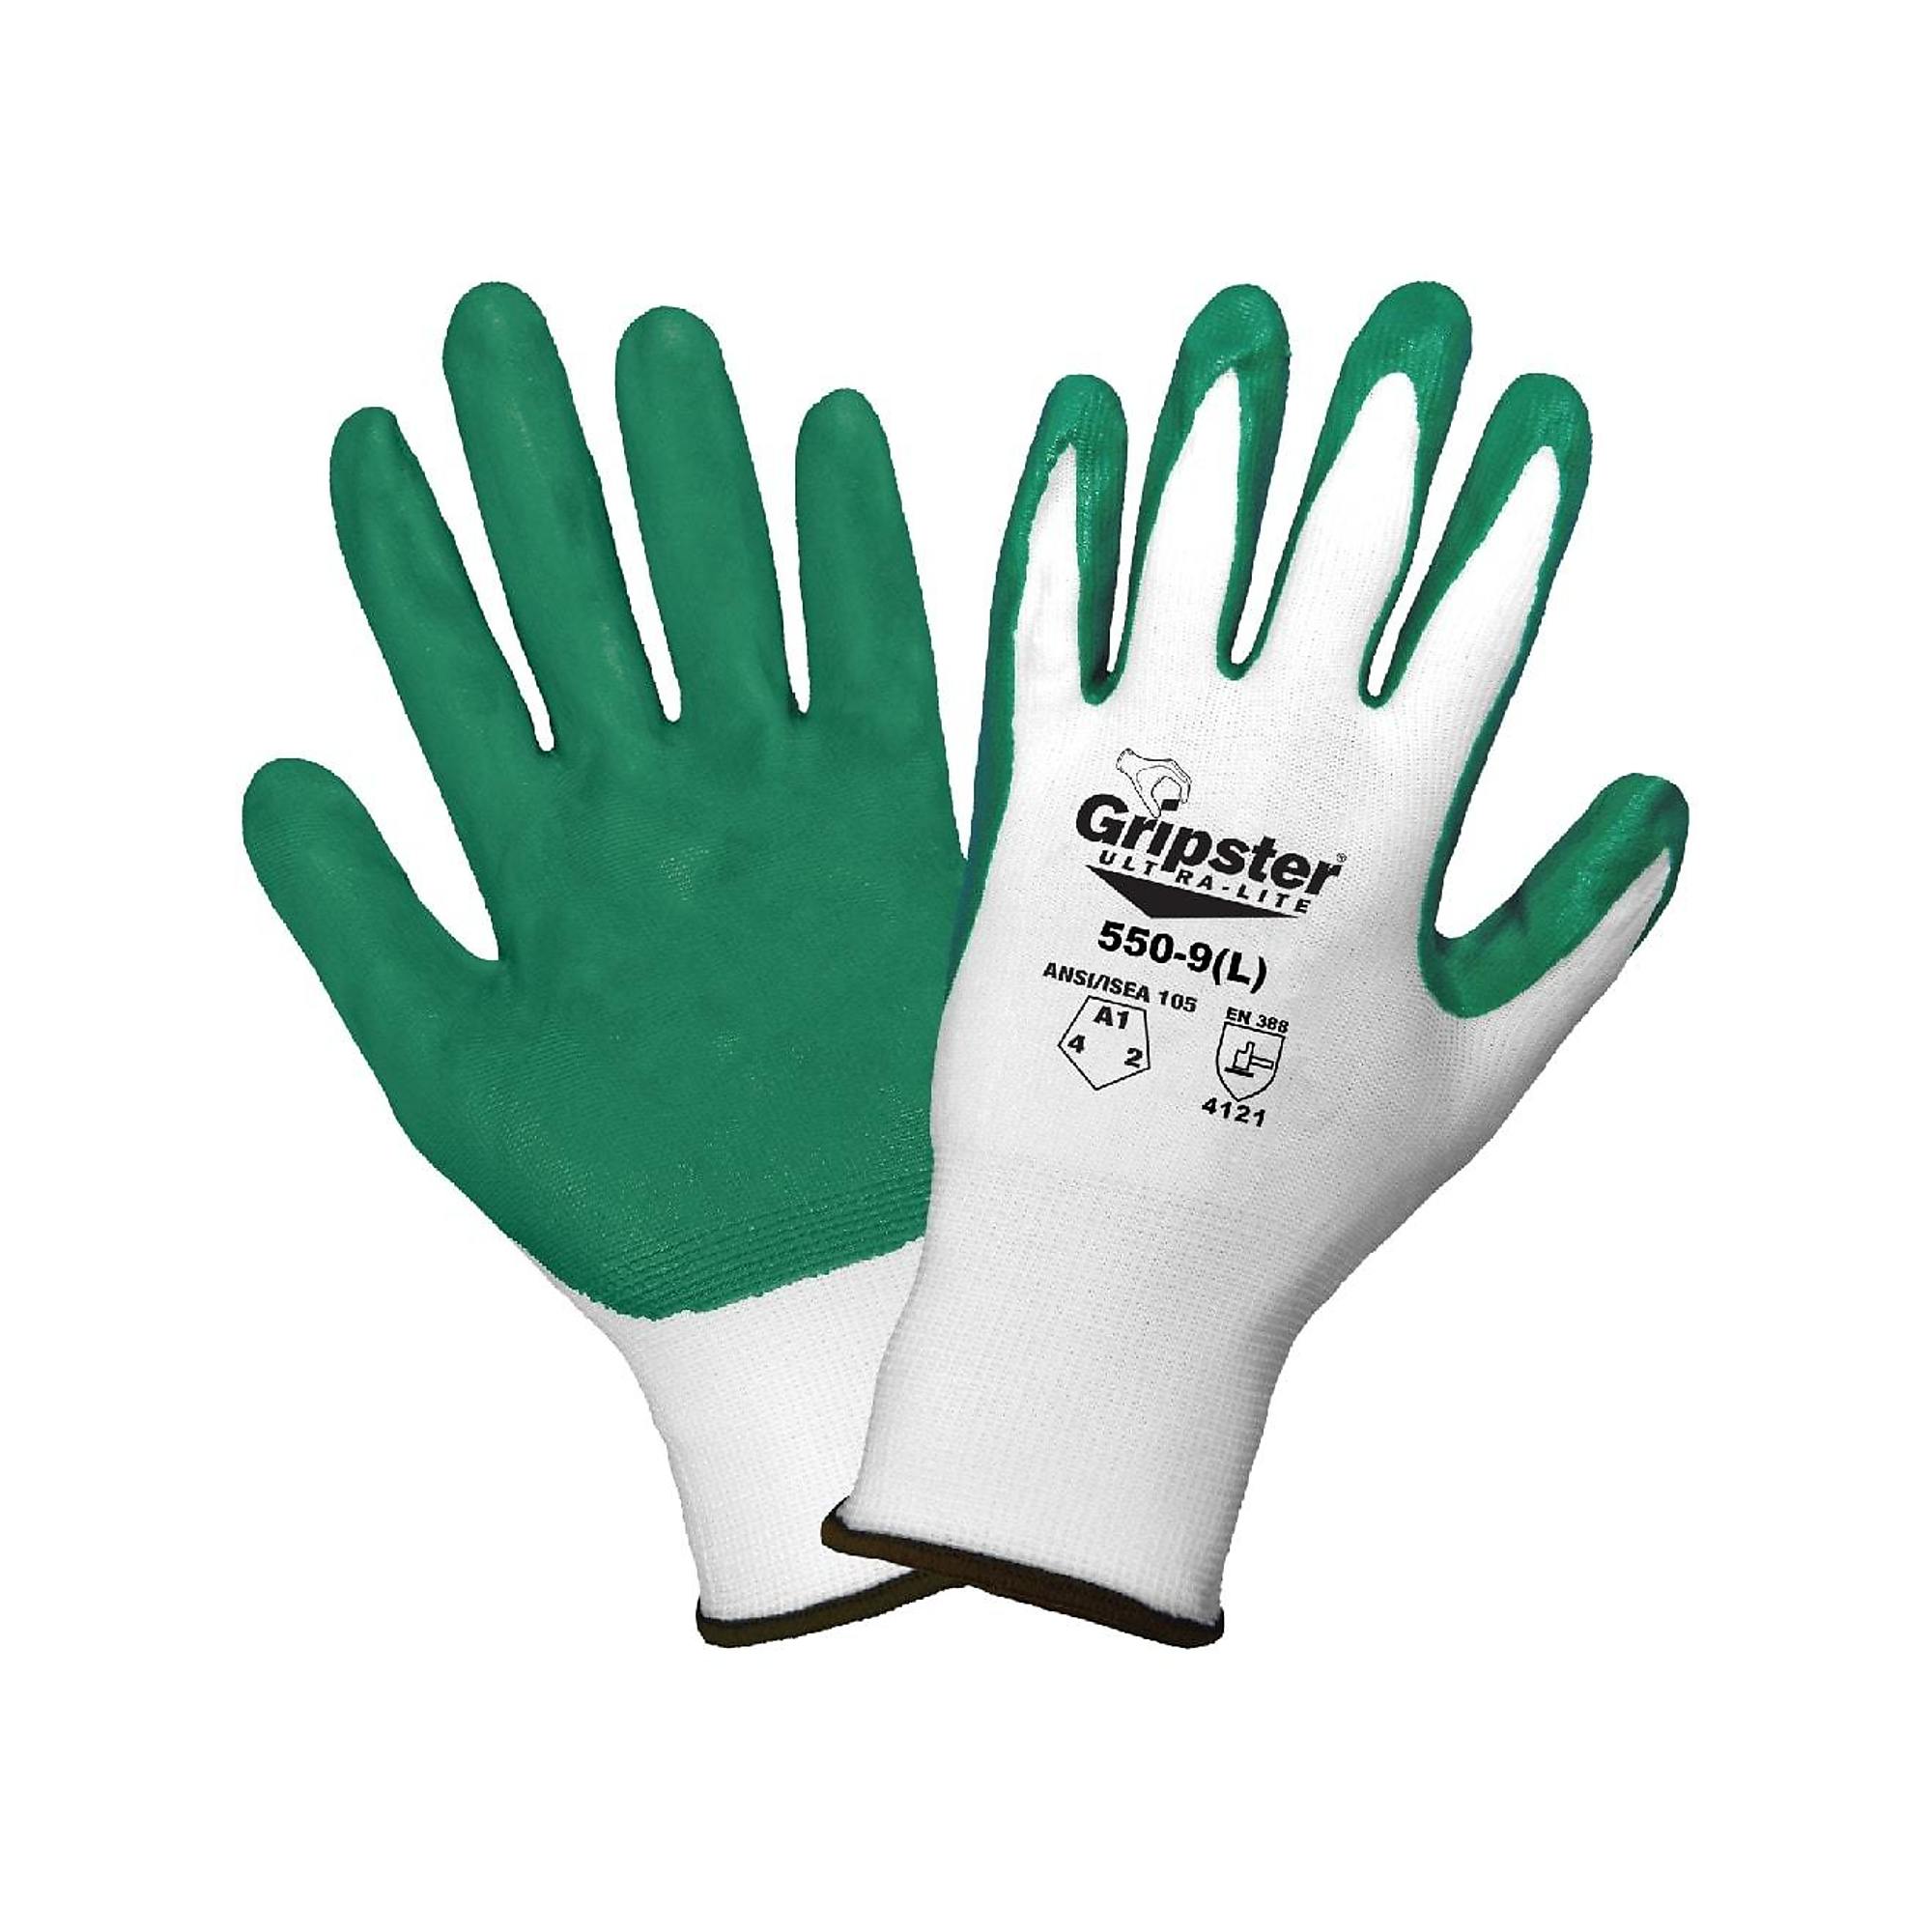 Global Glove Gripster , Solid Nitrile Coated Nylon Gloves - 12 Pairs, Size M, Color White/Green, Included (qty.) 12 Model 550-8(M)